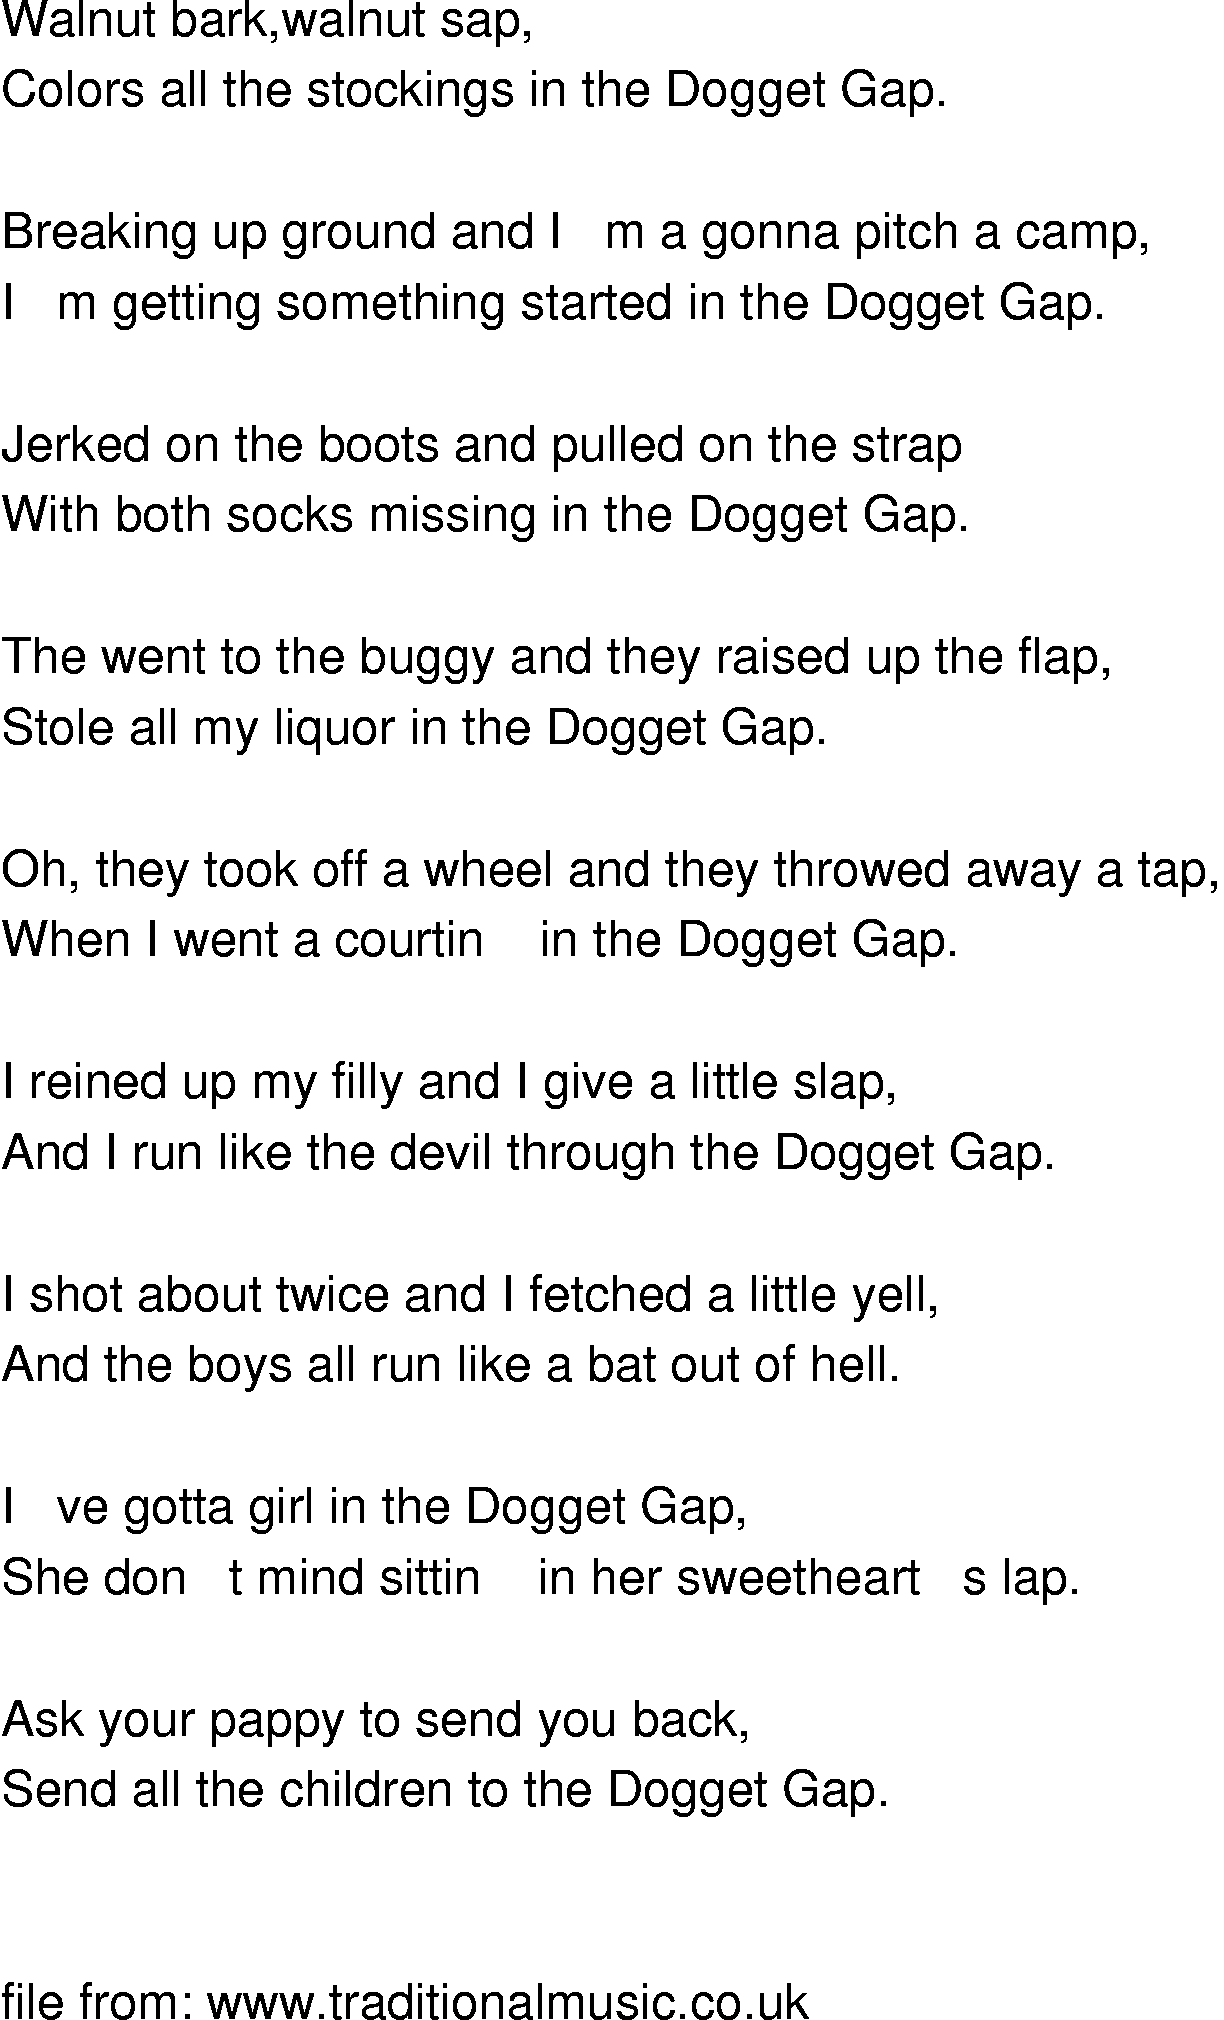 Old-Time (oldtimey) Song Lyrics - doggets gap lunsford 